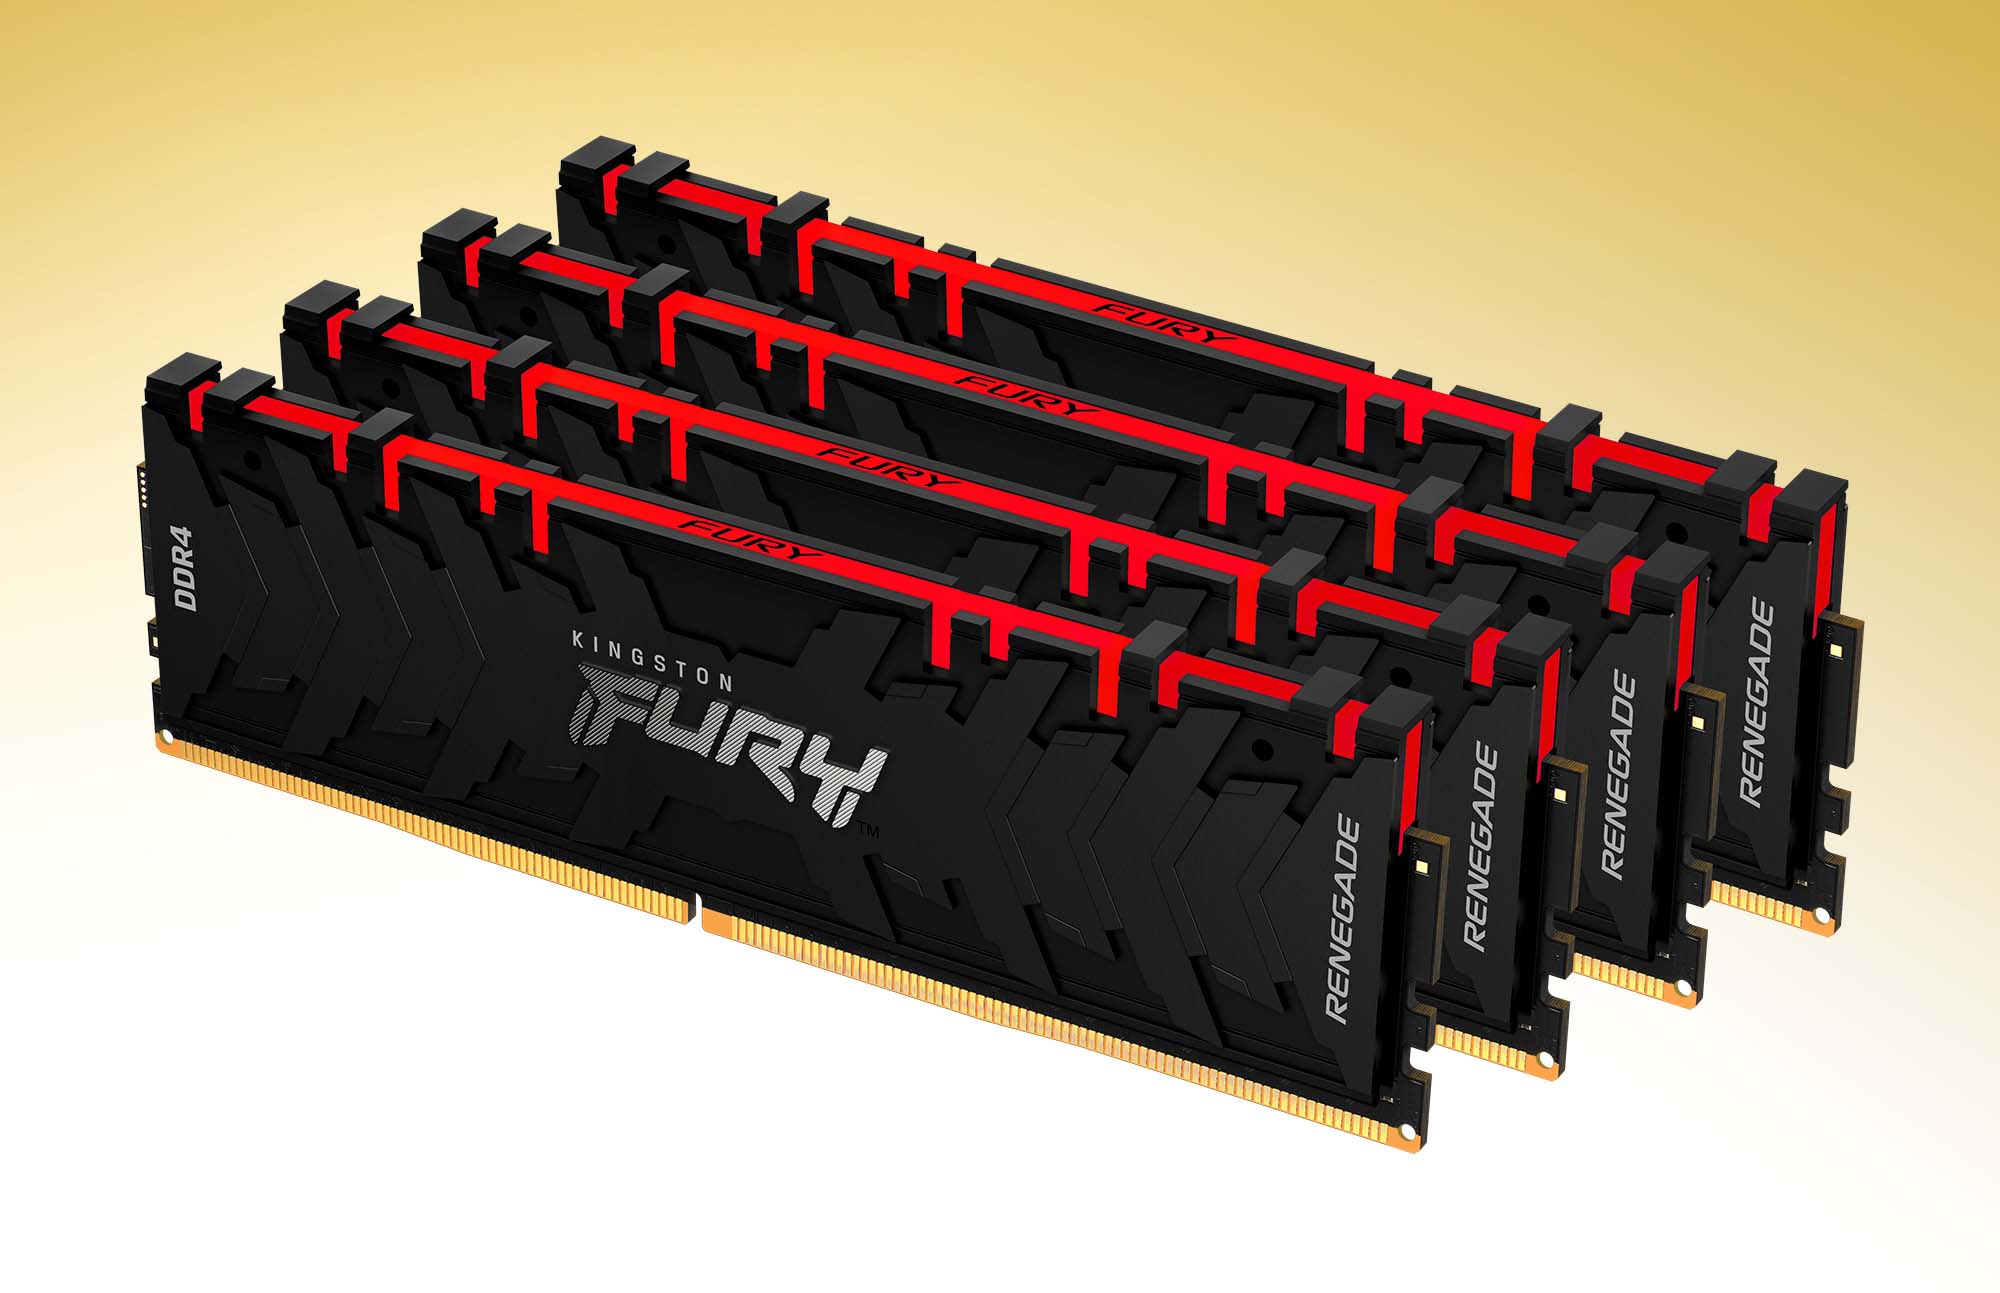 Kingston Technology Unleashes New High-Performance, Enthusiast & Gaming Brand: Kingston FURY